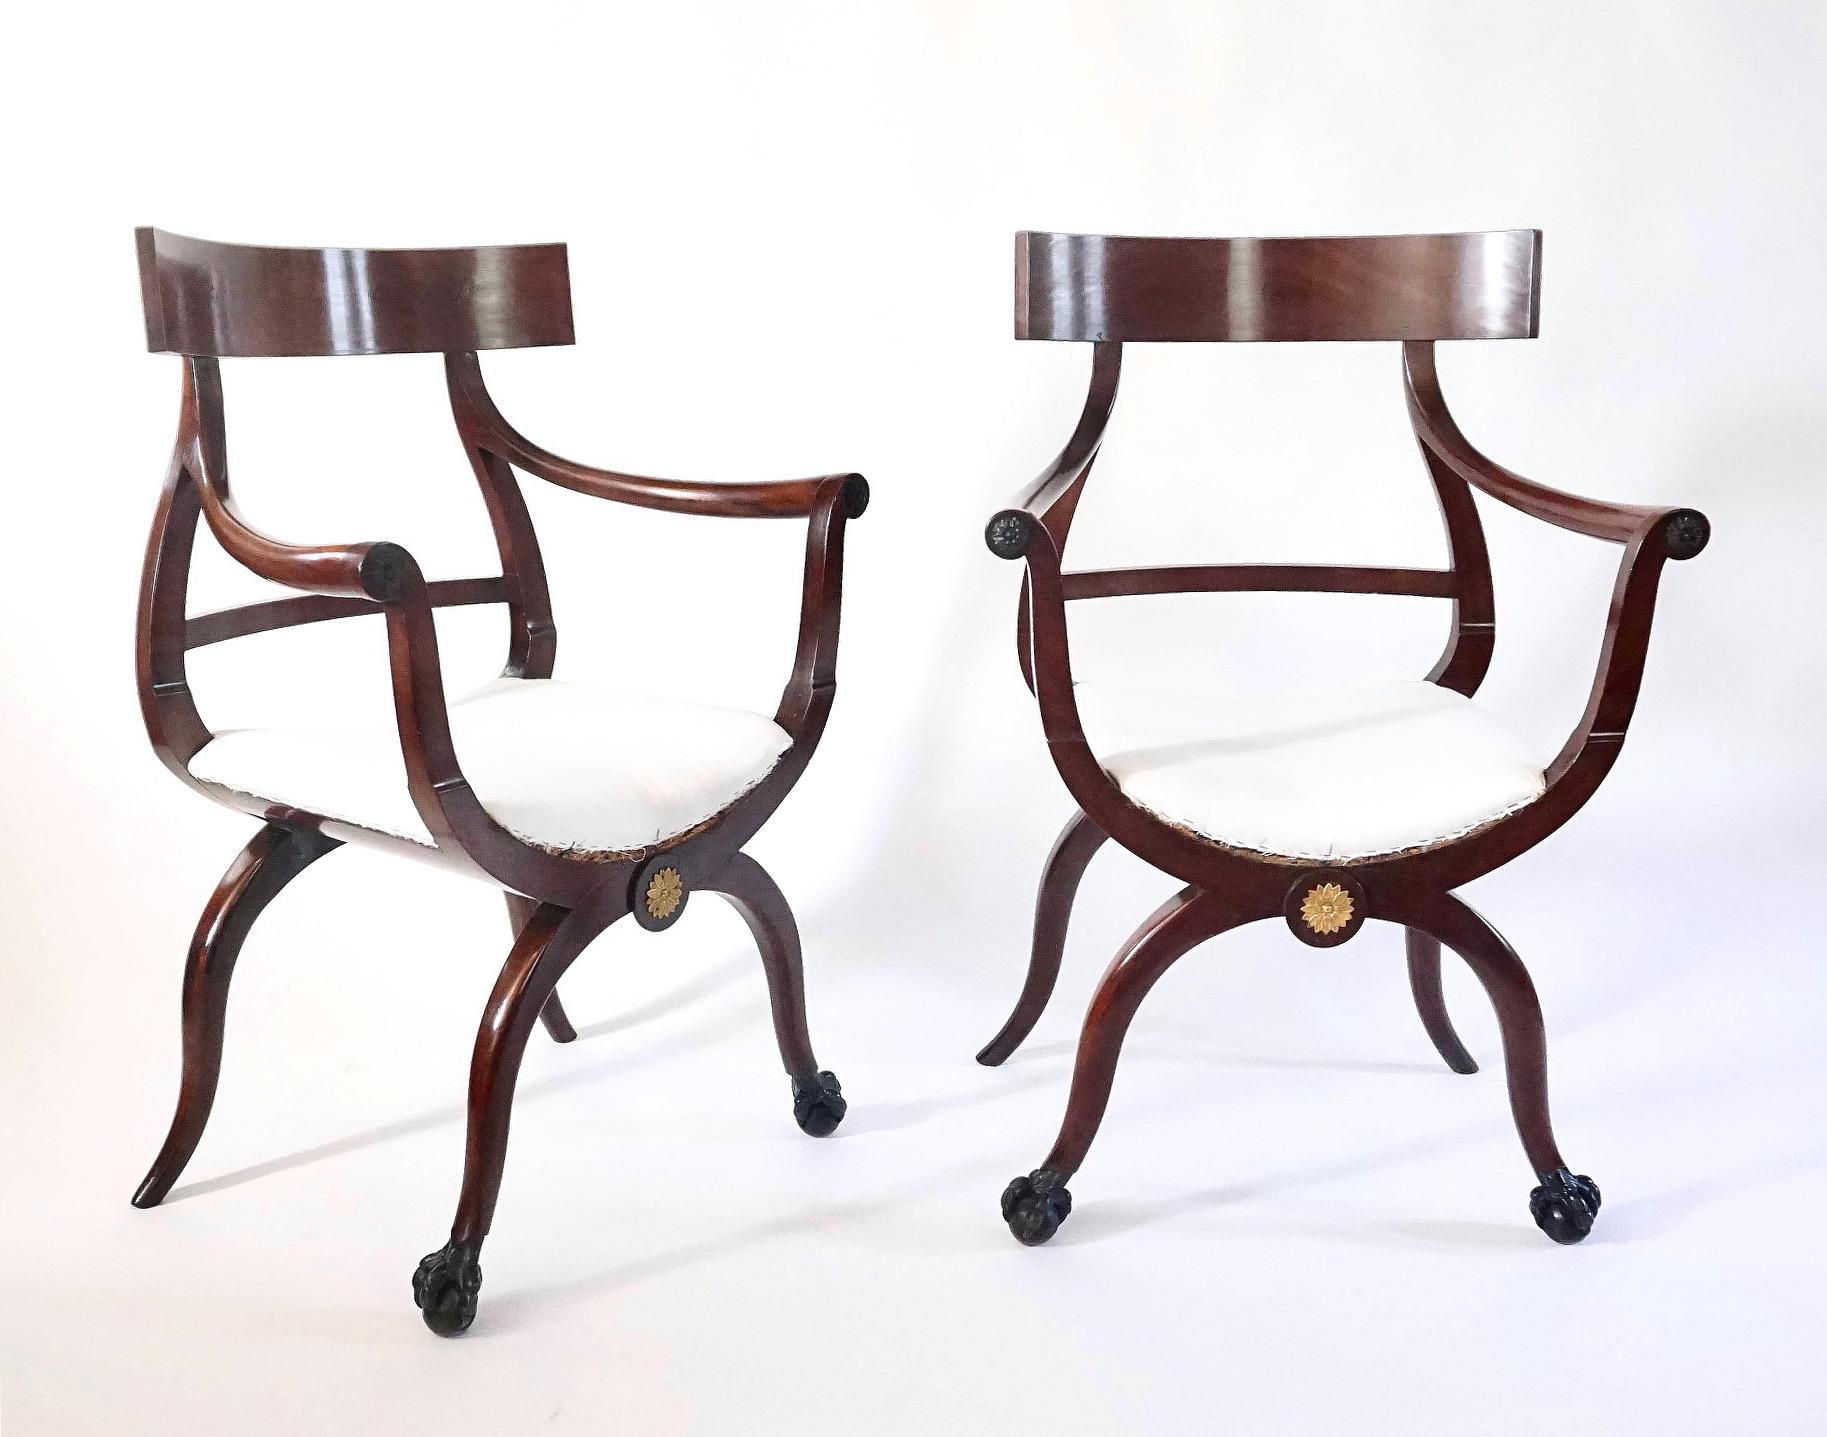 An incredibly rare and unusual pair of circa 1800 Russian or Baltic Directoire style armchairs or fauteuils of both klismos and curule variant form, the solid mahogany frames gilt-metal rosette mounted with upholstered cupped seats and finely carved